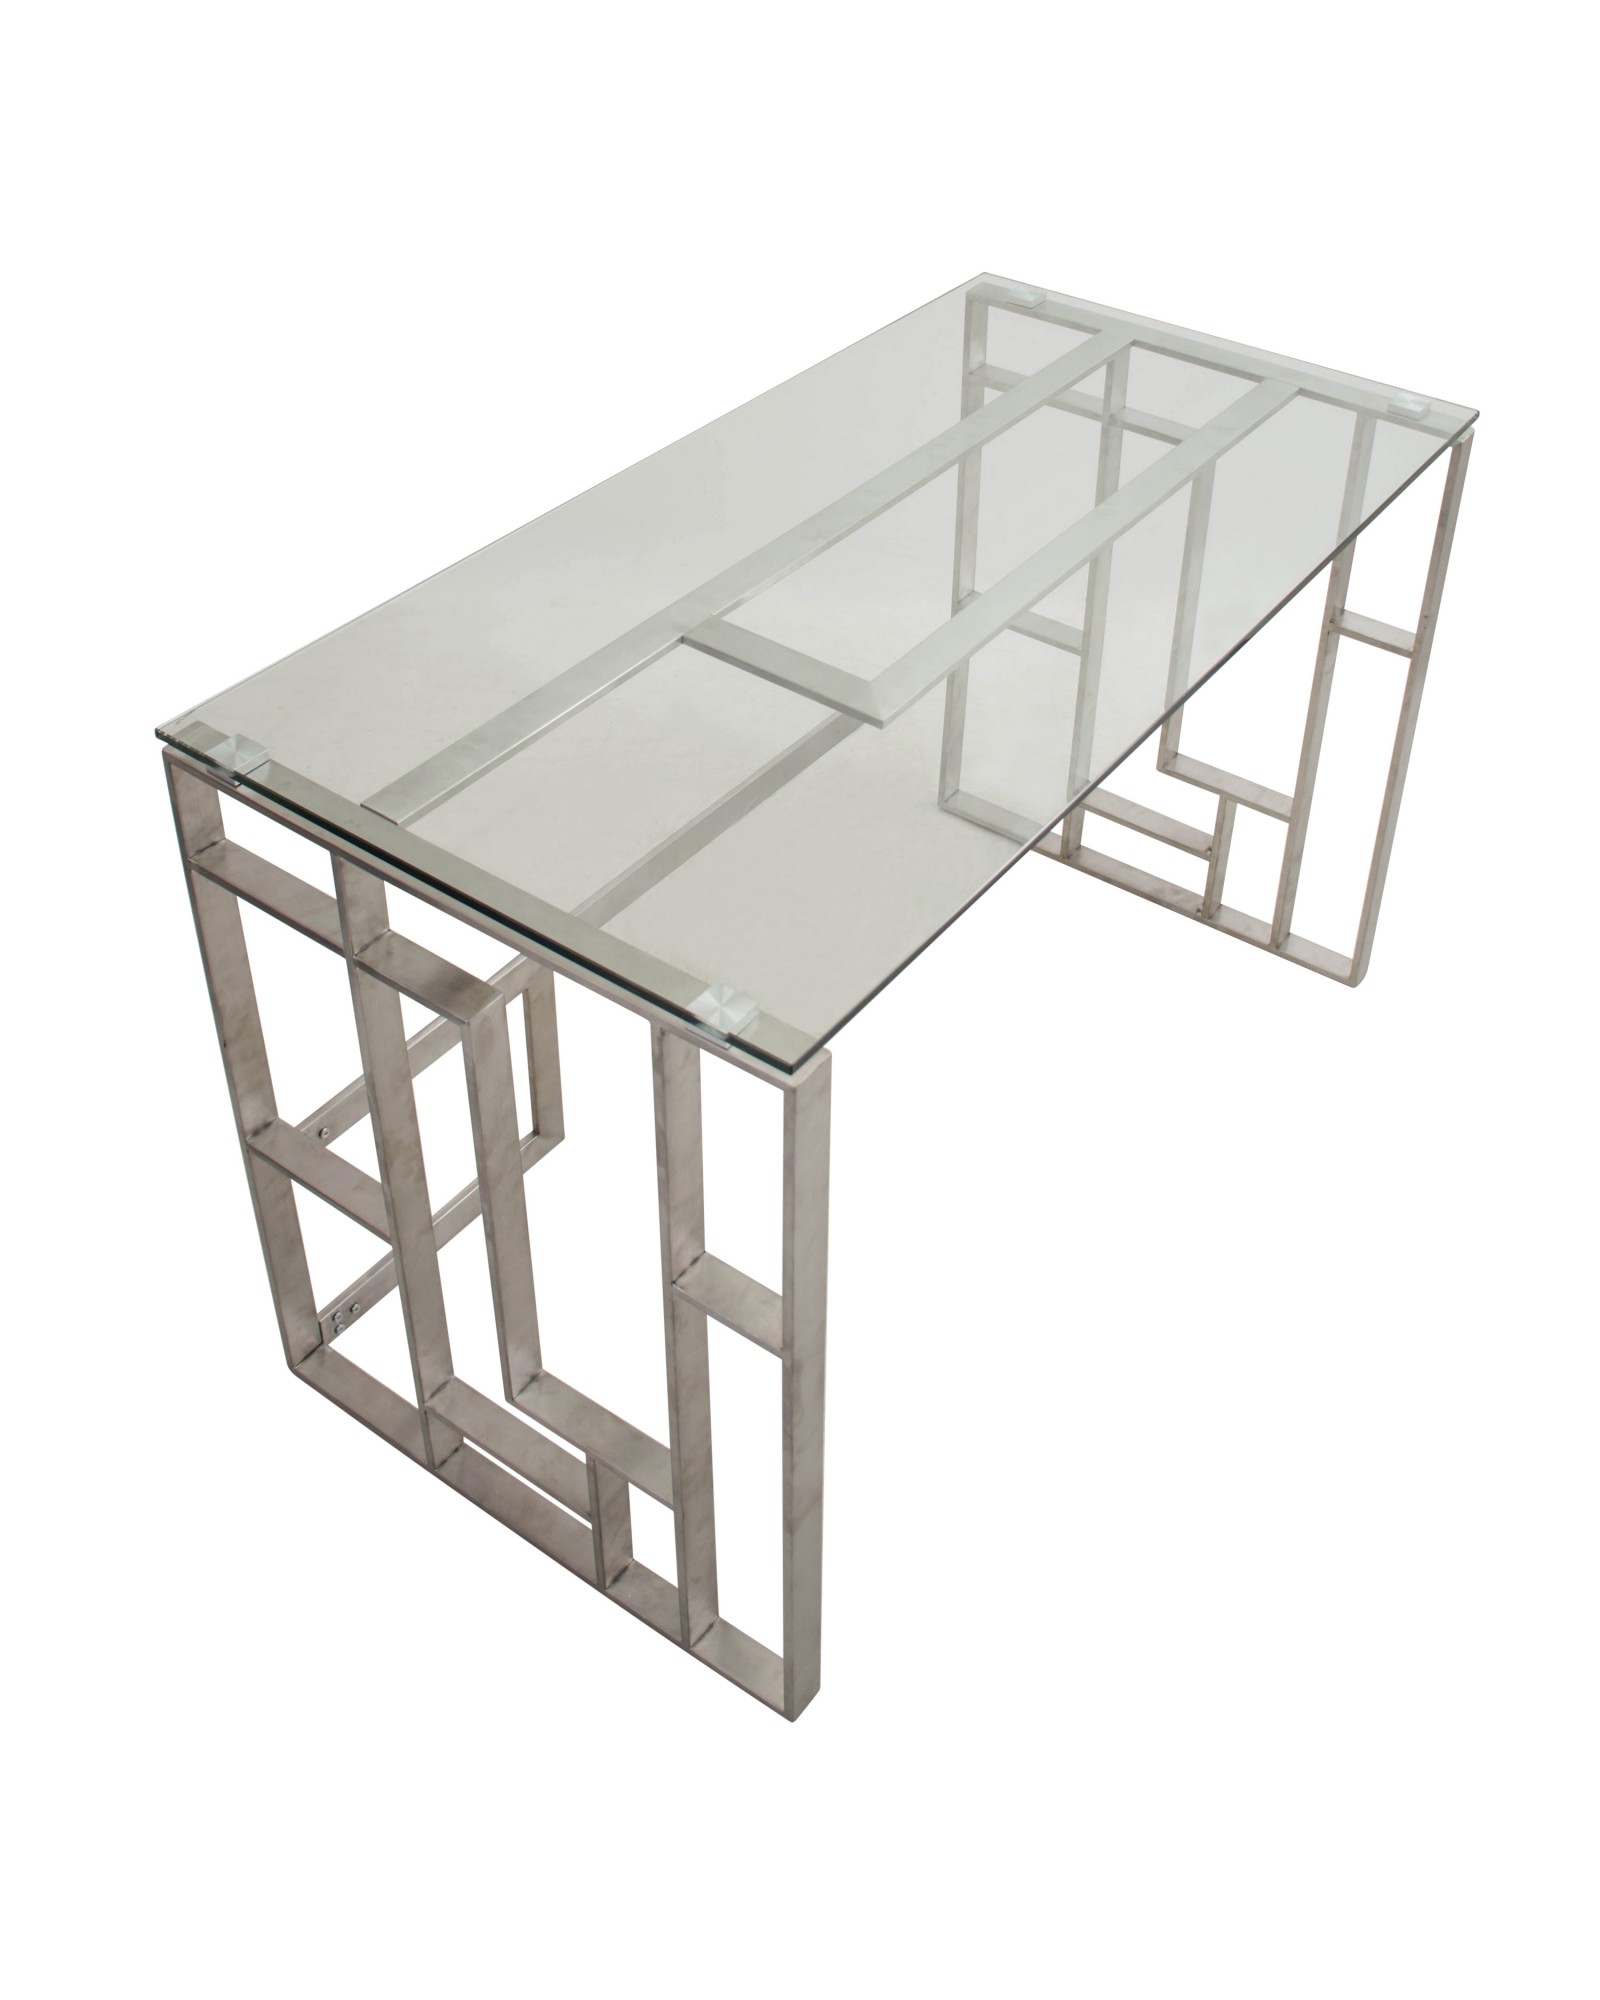 Mandarin Contemporary Desk in Brushed Stainless Steel and Clear Glass